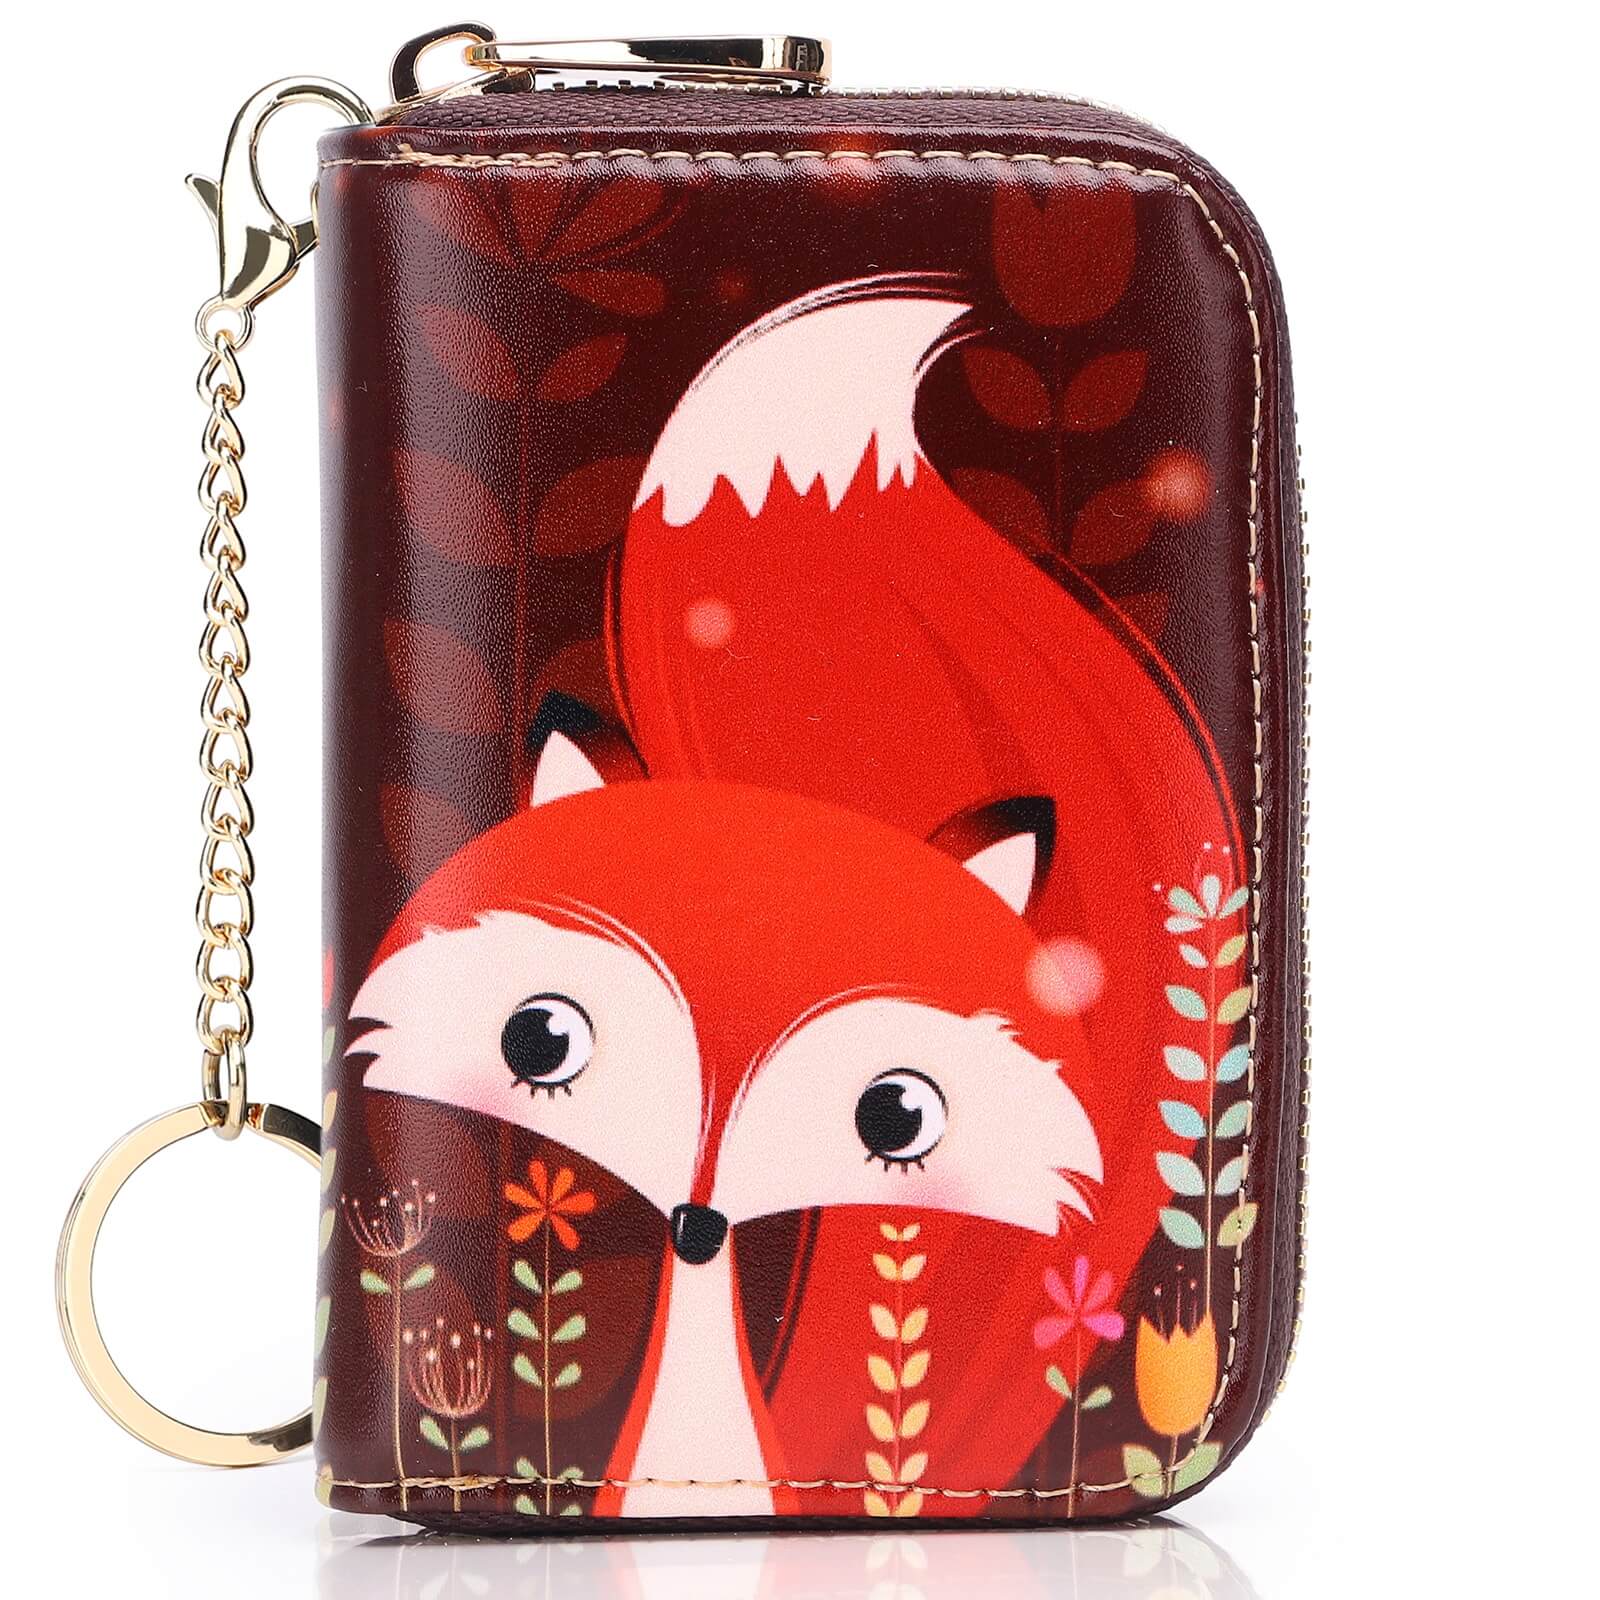 FOX Cartoon Collection by Chala Vegan Purses! – The Pink Pigs